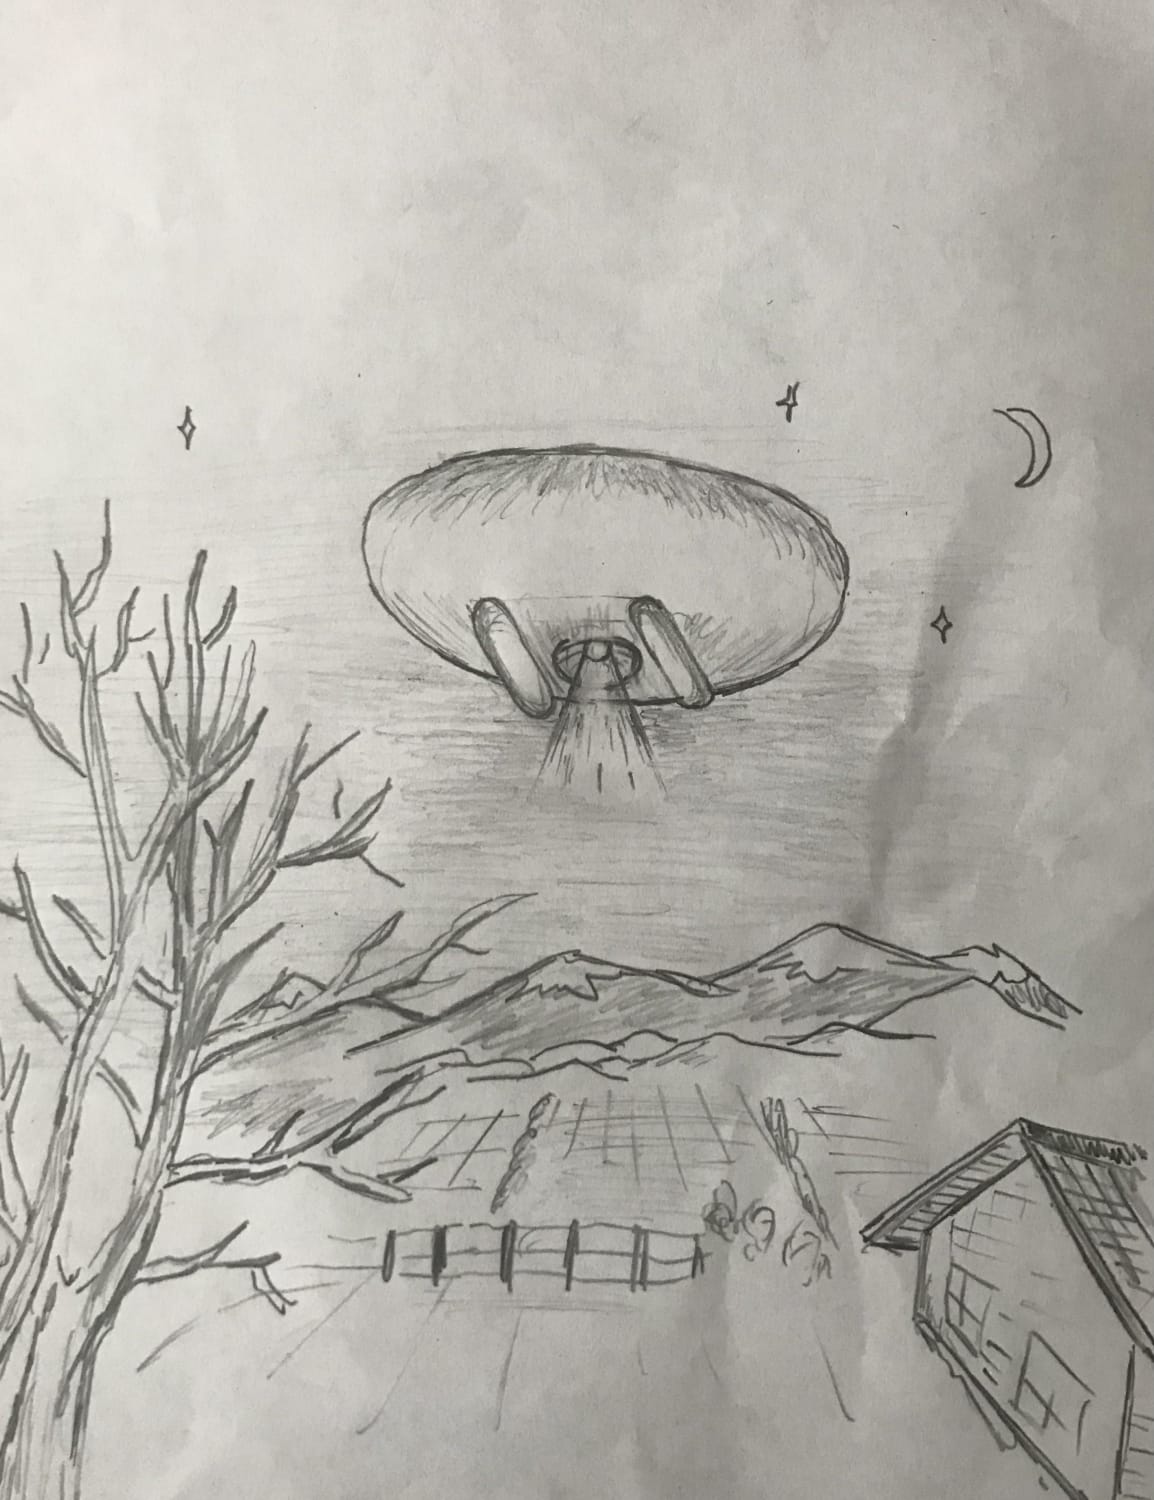 UFO sighting. Twin Falls, Idaho. Artistic Representation I did for the friend who saw it. Seen early morning of 1/7/2020.